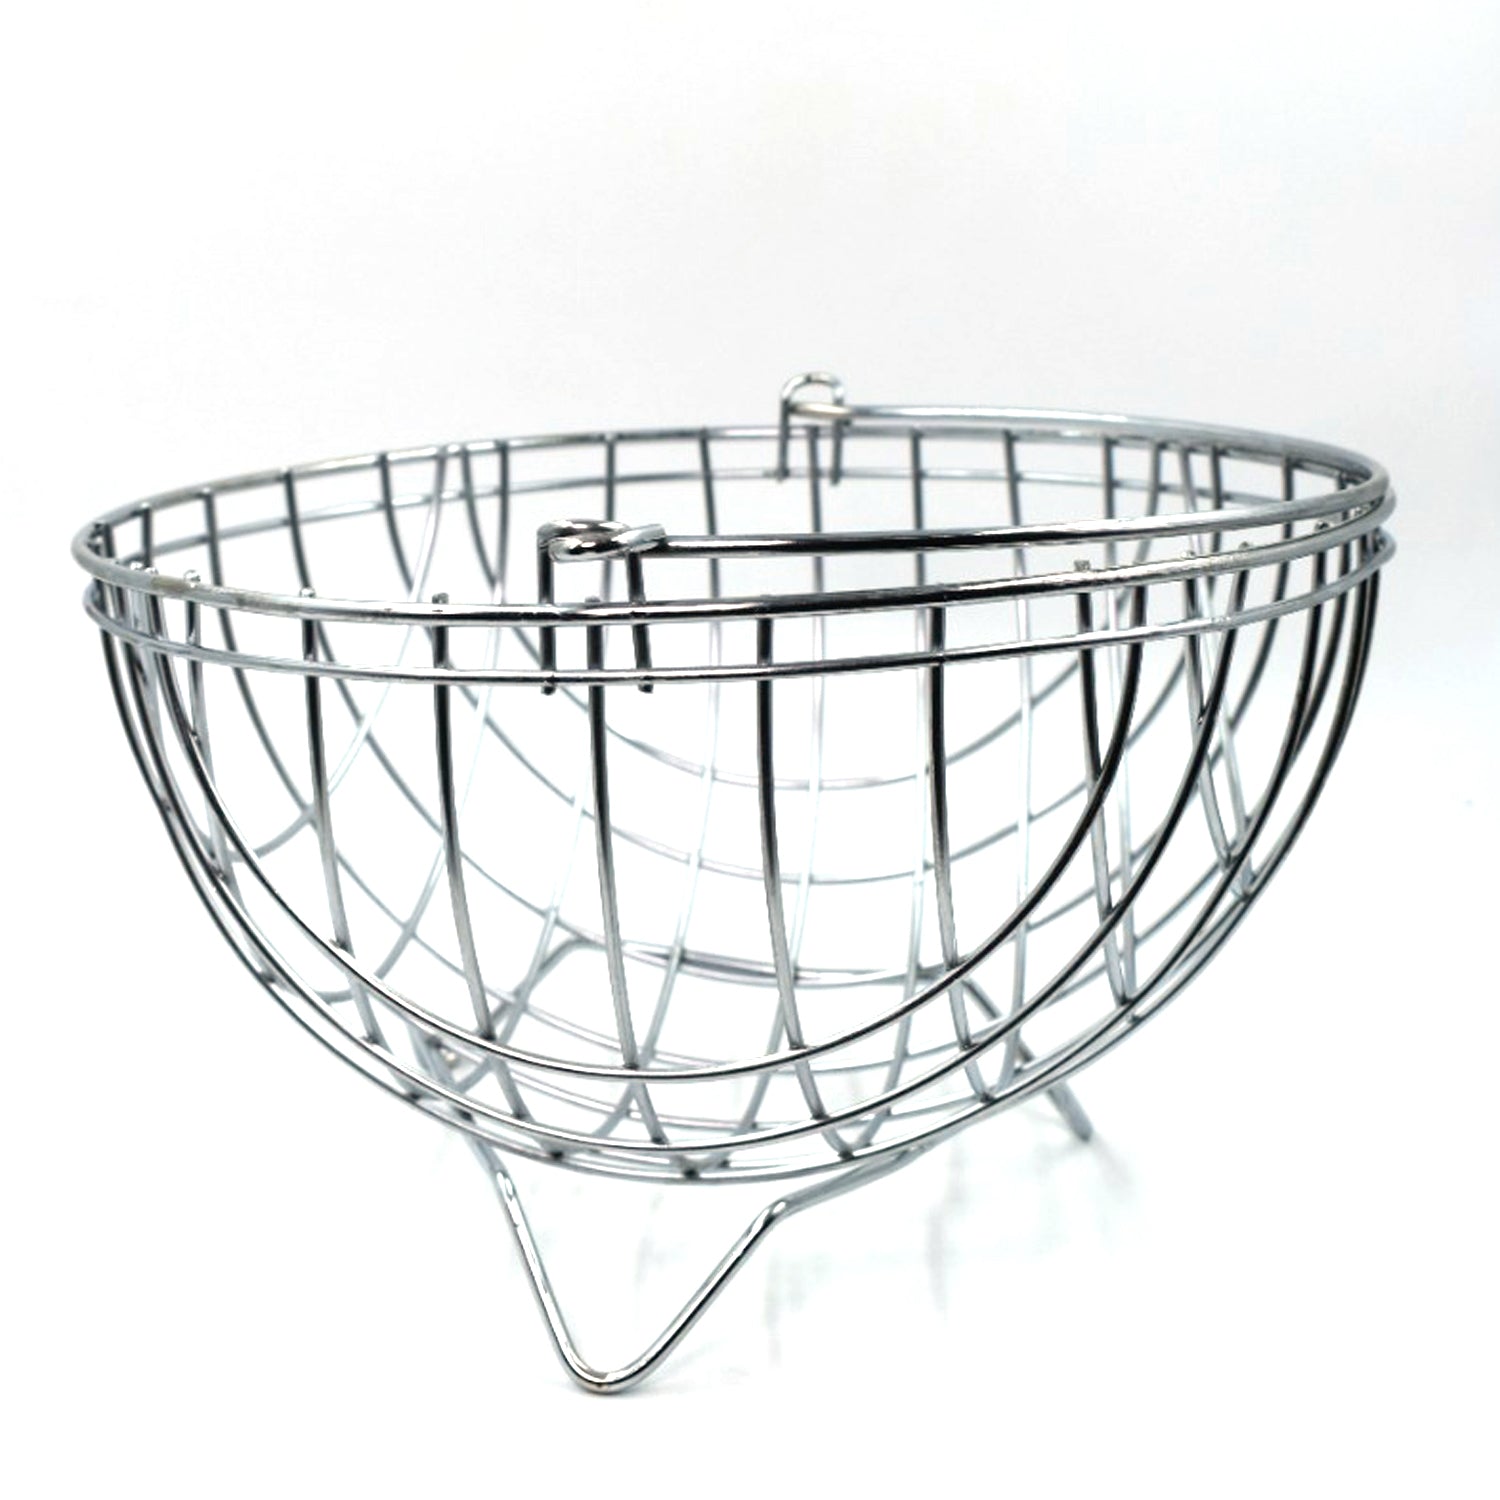 2742 SS Round Fruit Basket used for holding fruits as a decorative and using purposes in all kinds of official and household places etc. 